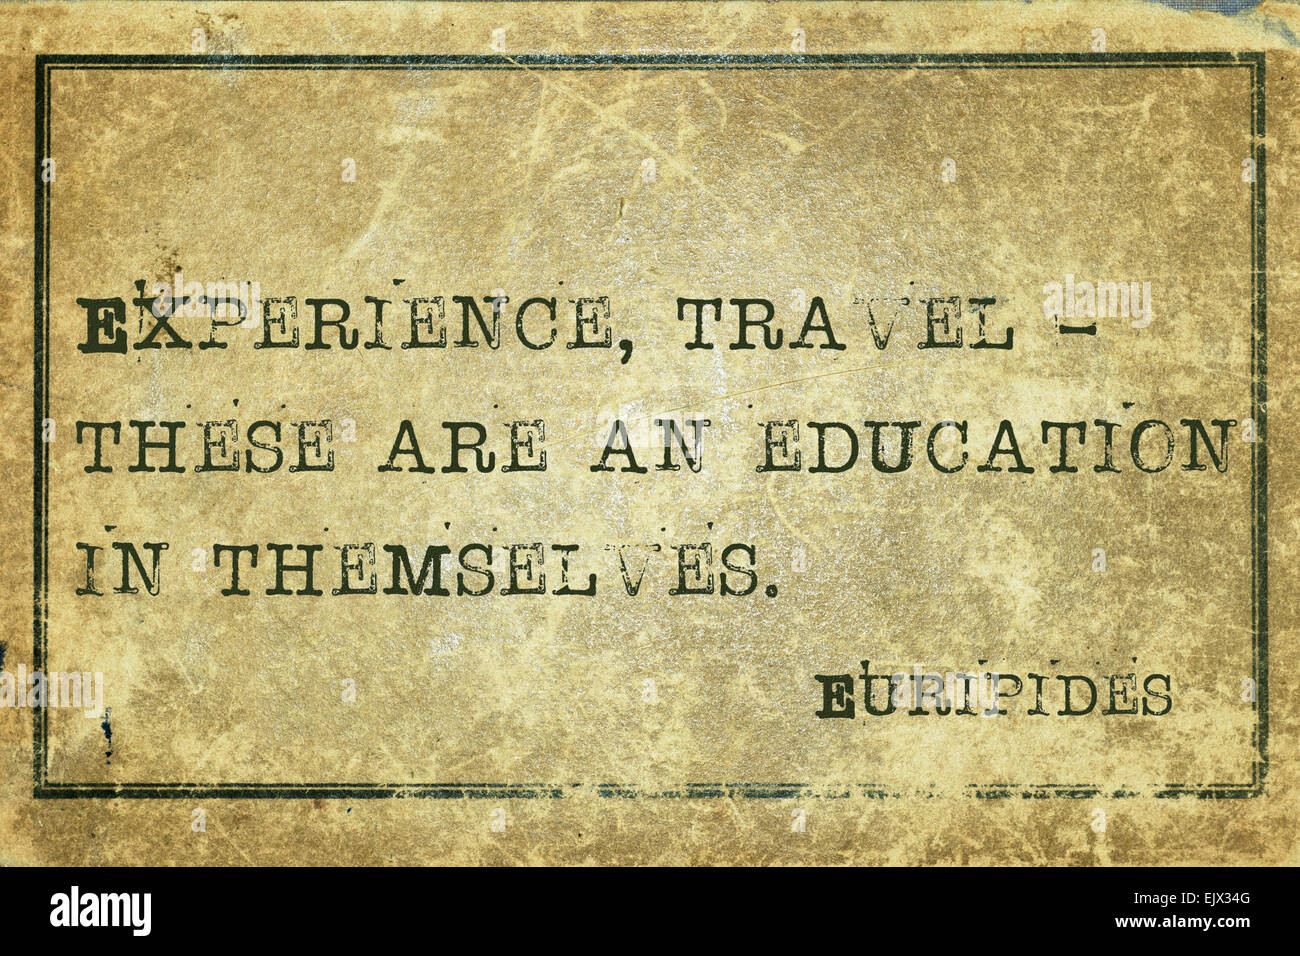 Experience, travel  - ancient Greek philosopher Euripides quote printed on grunge vintage cardboard Stock Photo